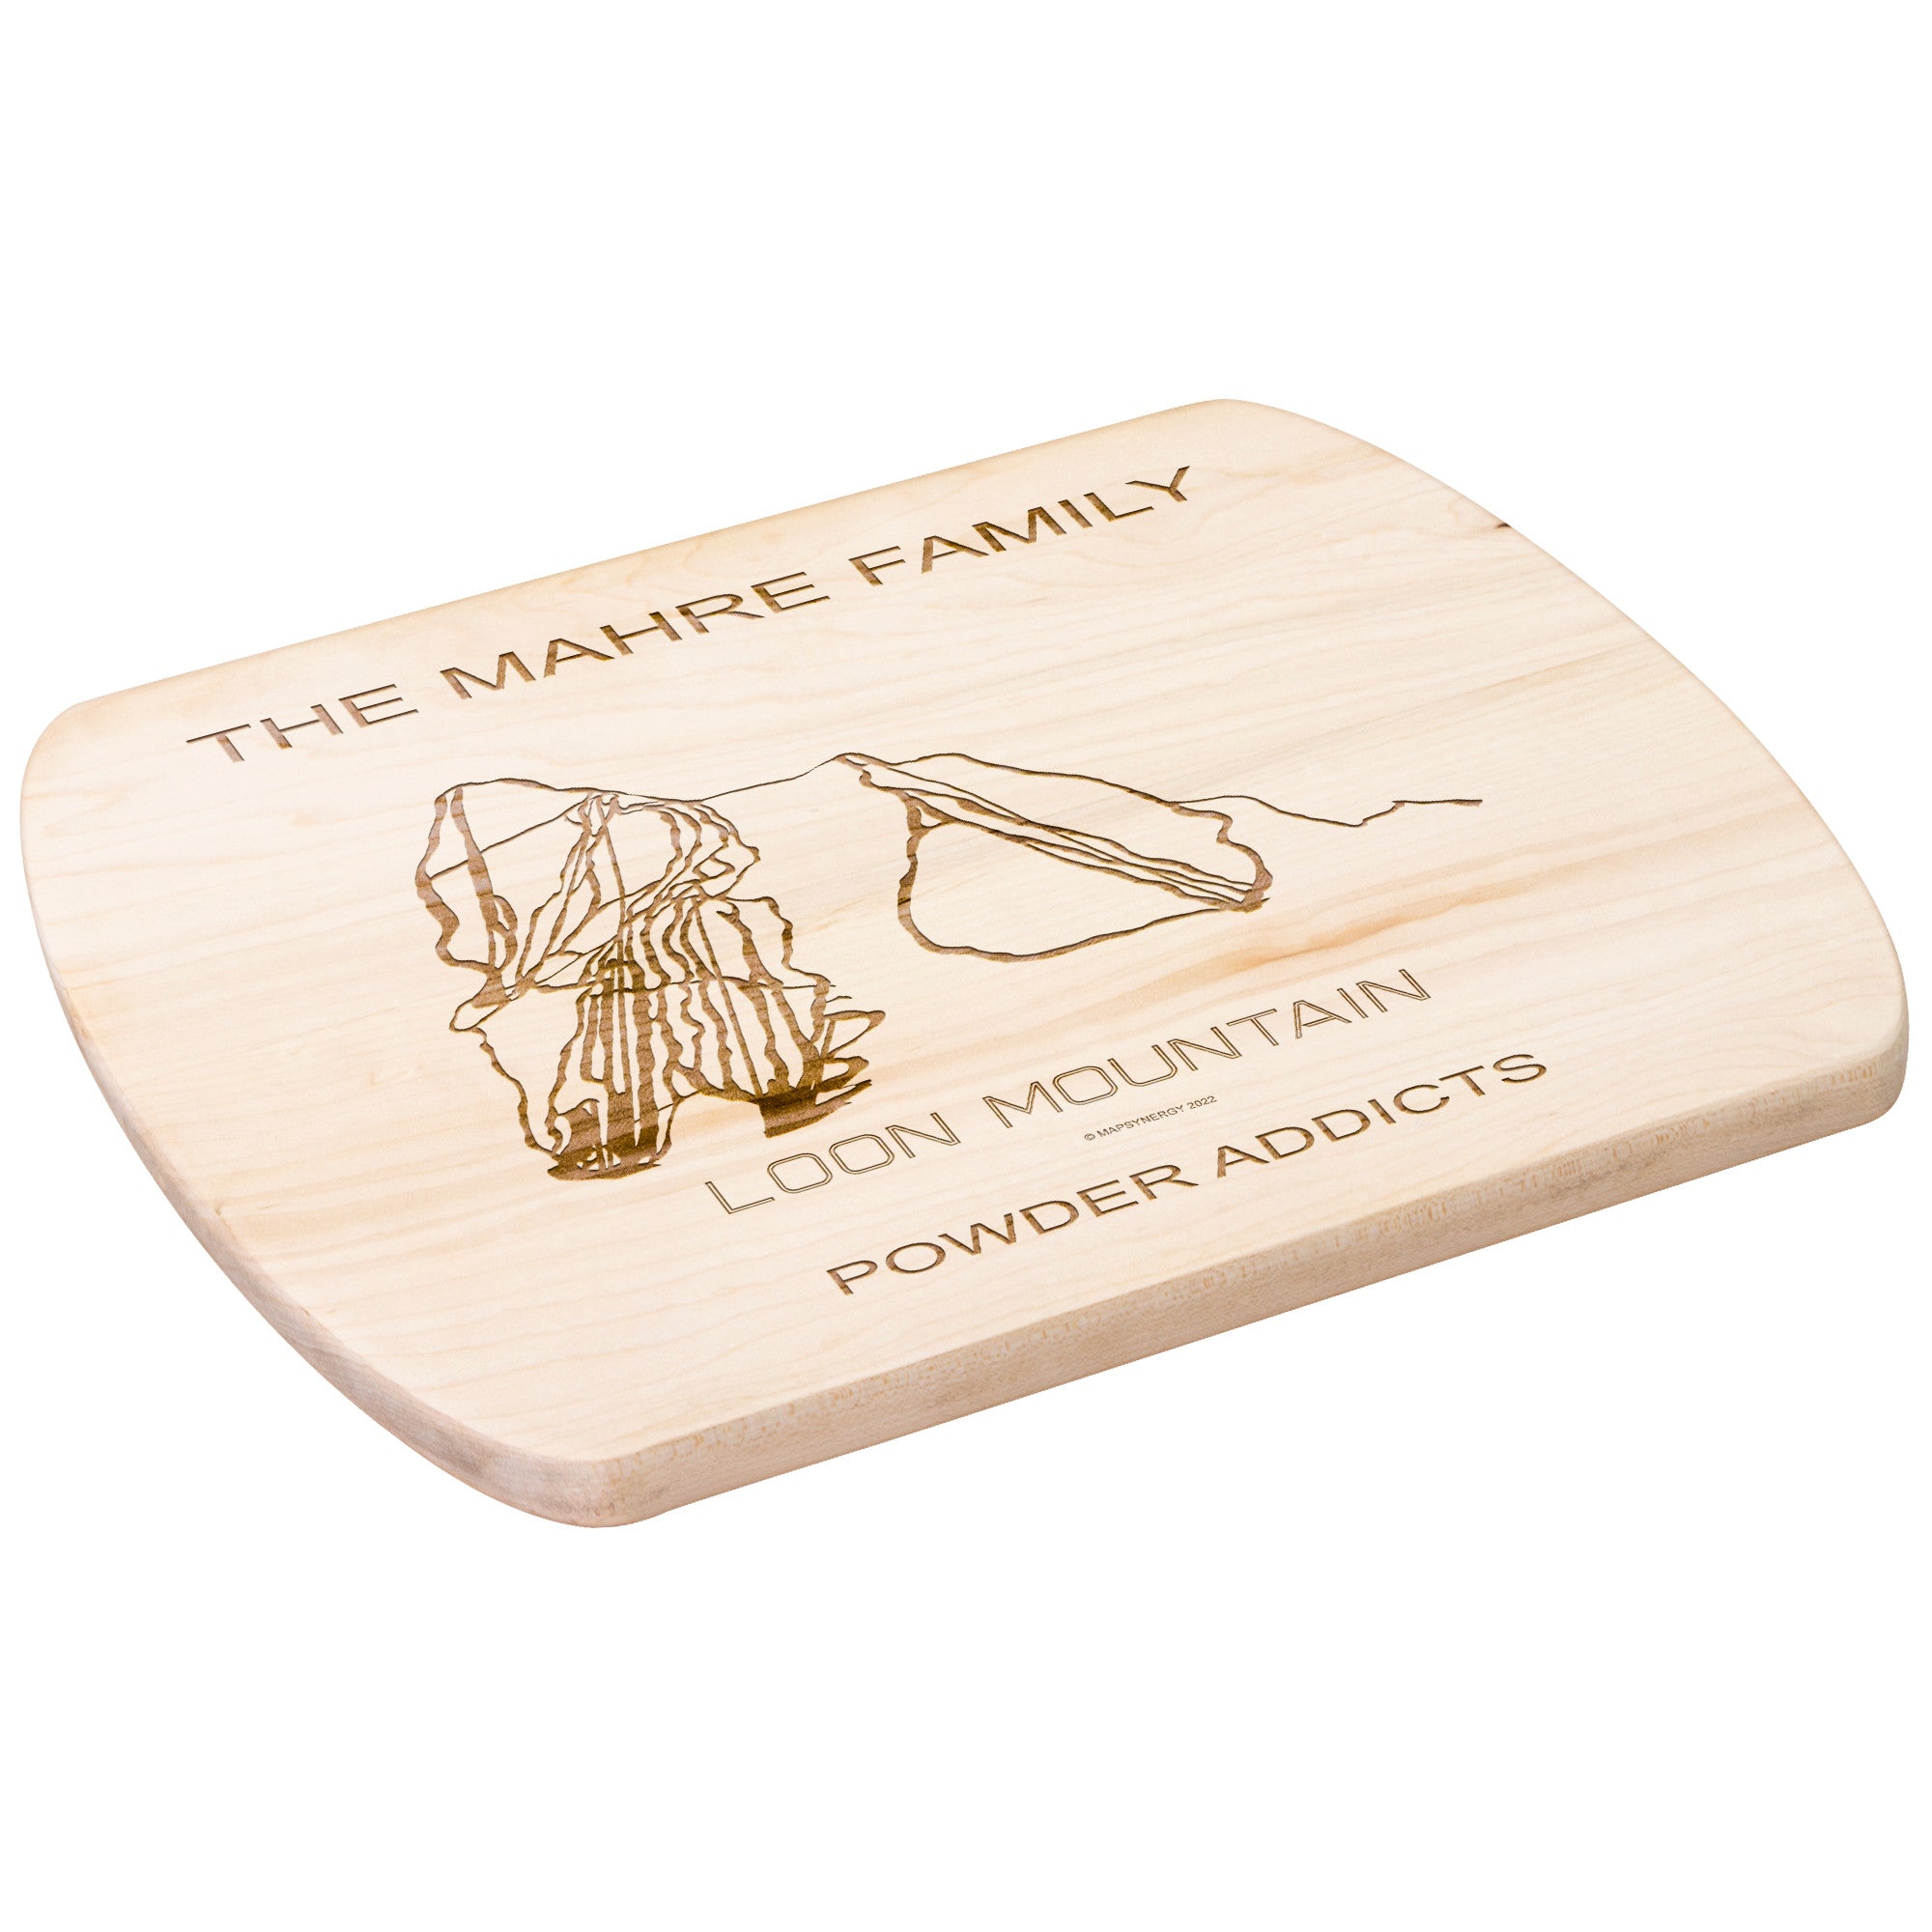 PERSONALIZED  Loon Mountain, New Hampshire SKI TRAIL MAP CUTTING BOARD